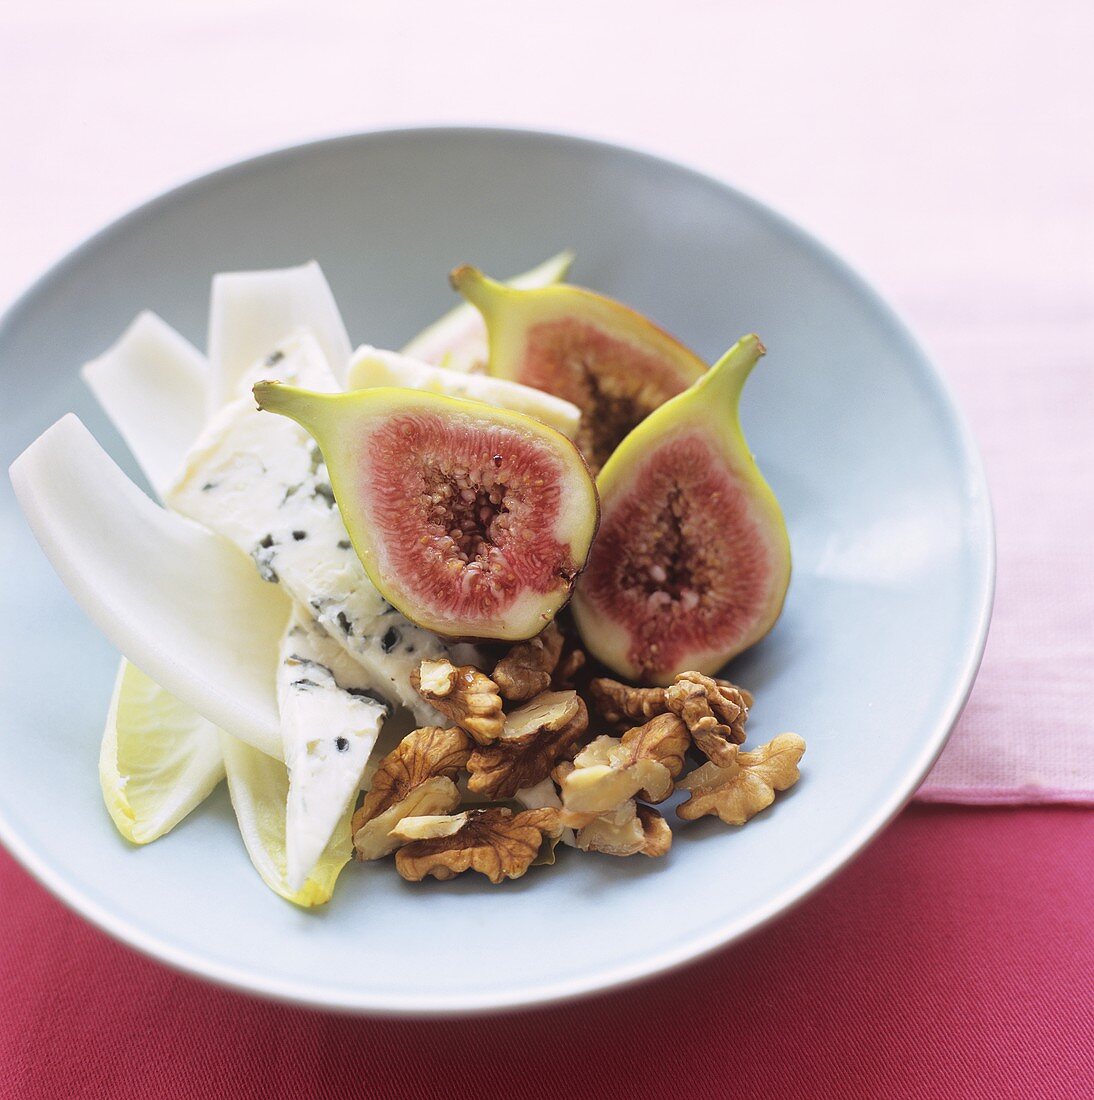 Blue cheese with figs and walnuts